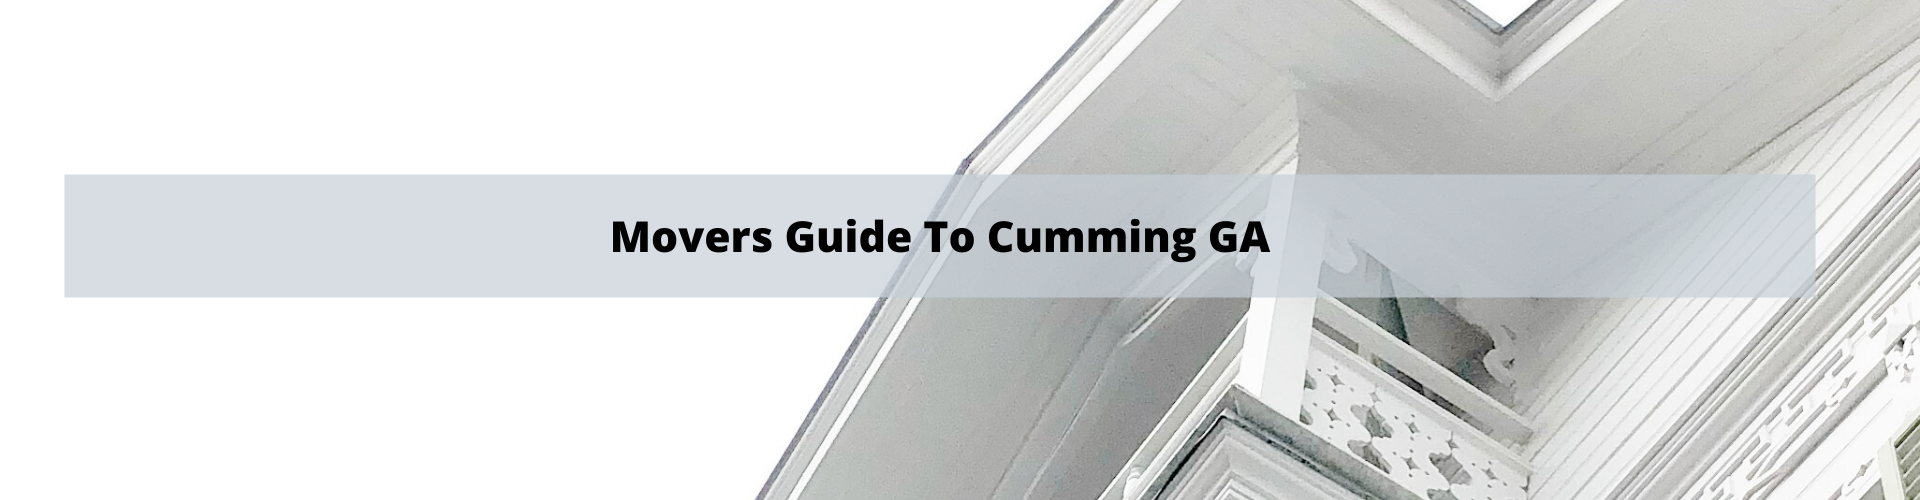 Movers Guide To Cumming GA